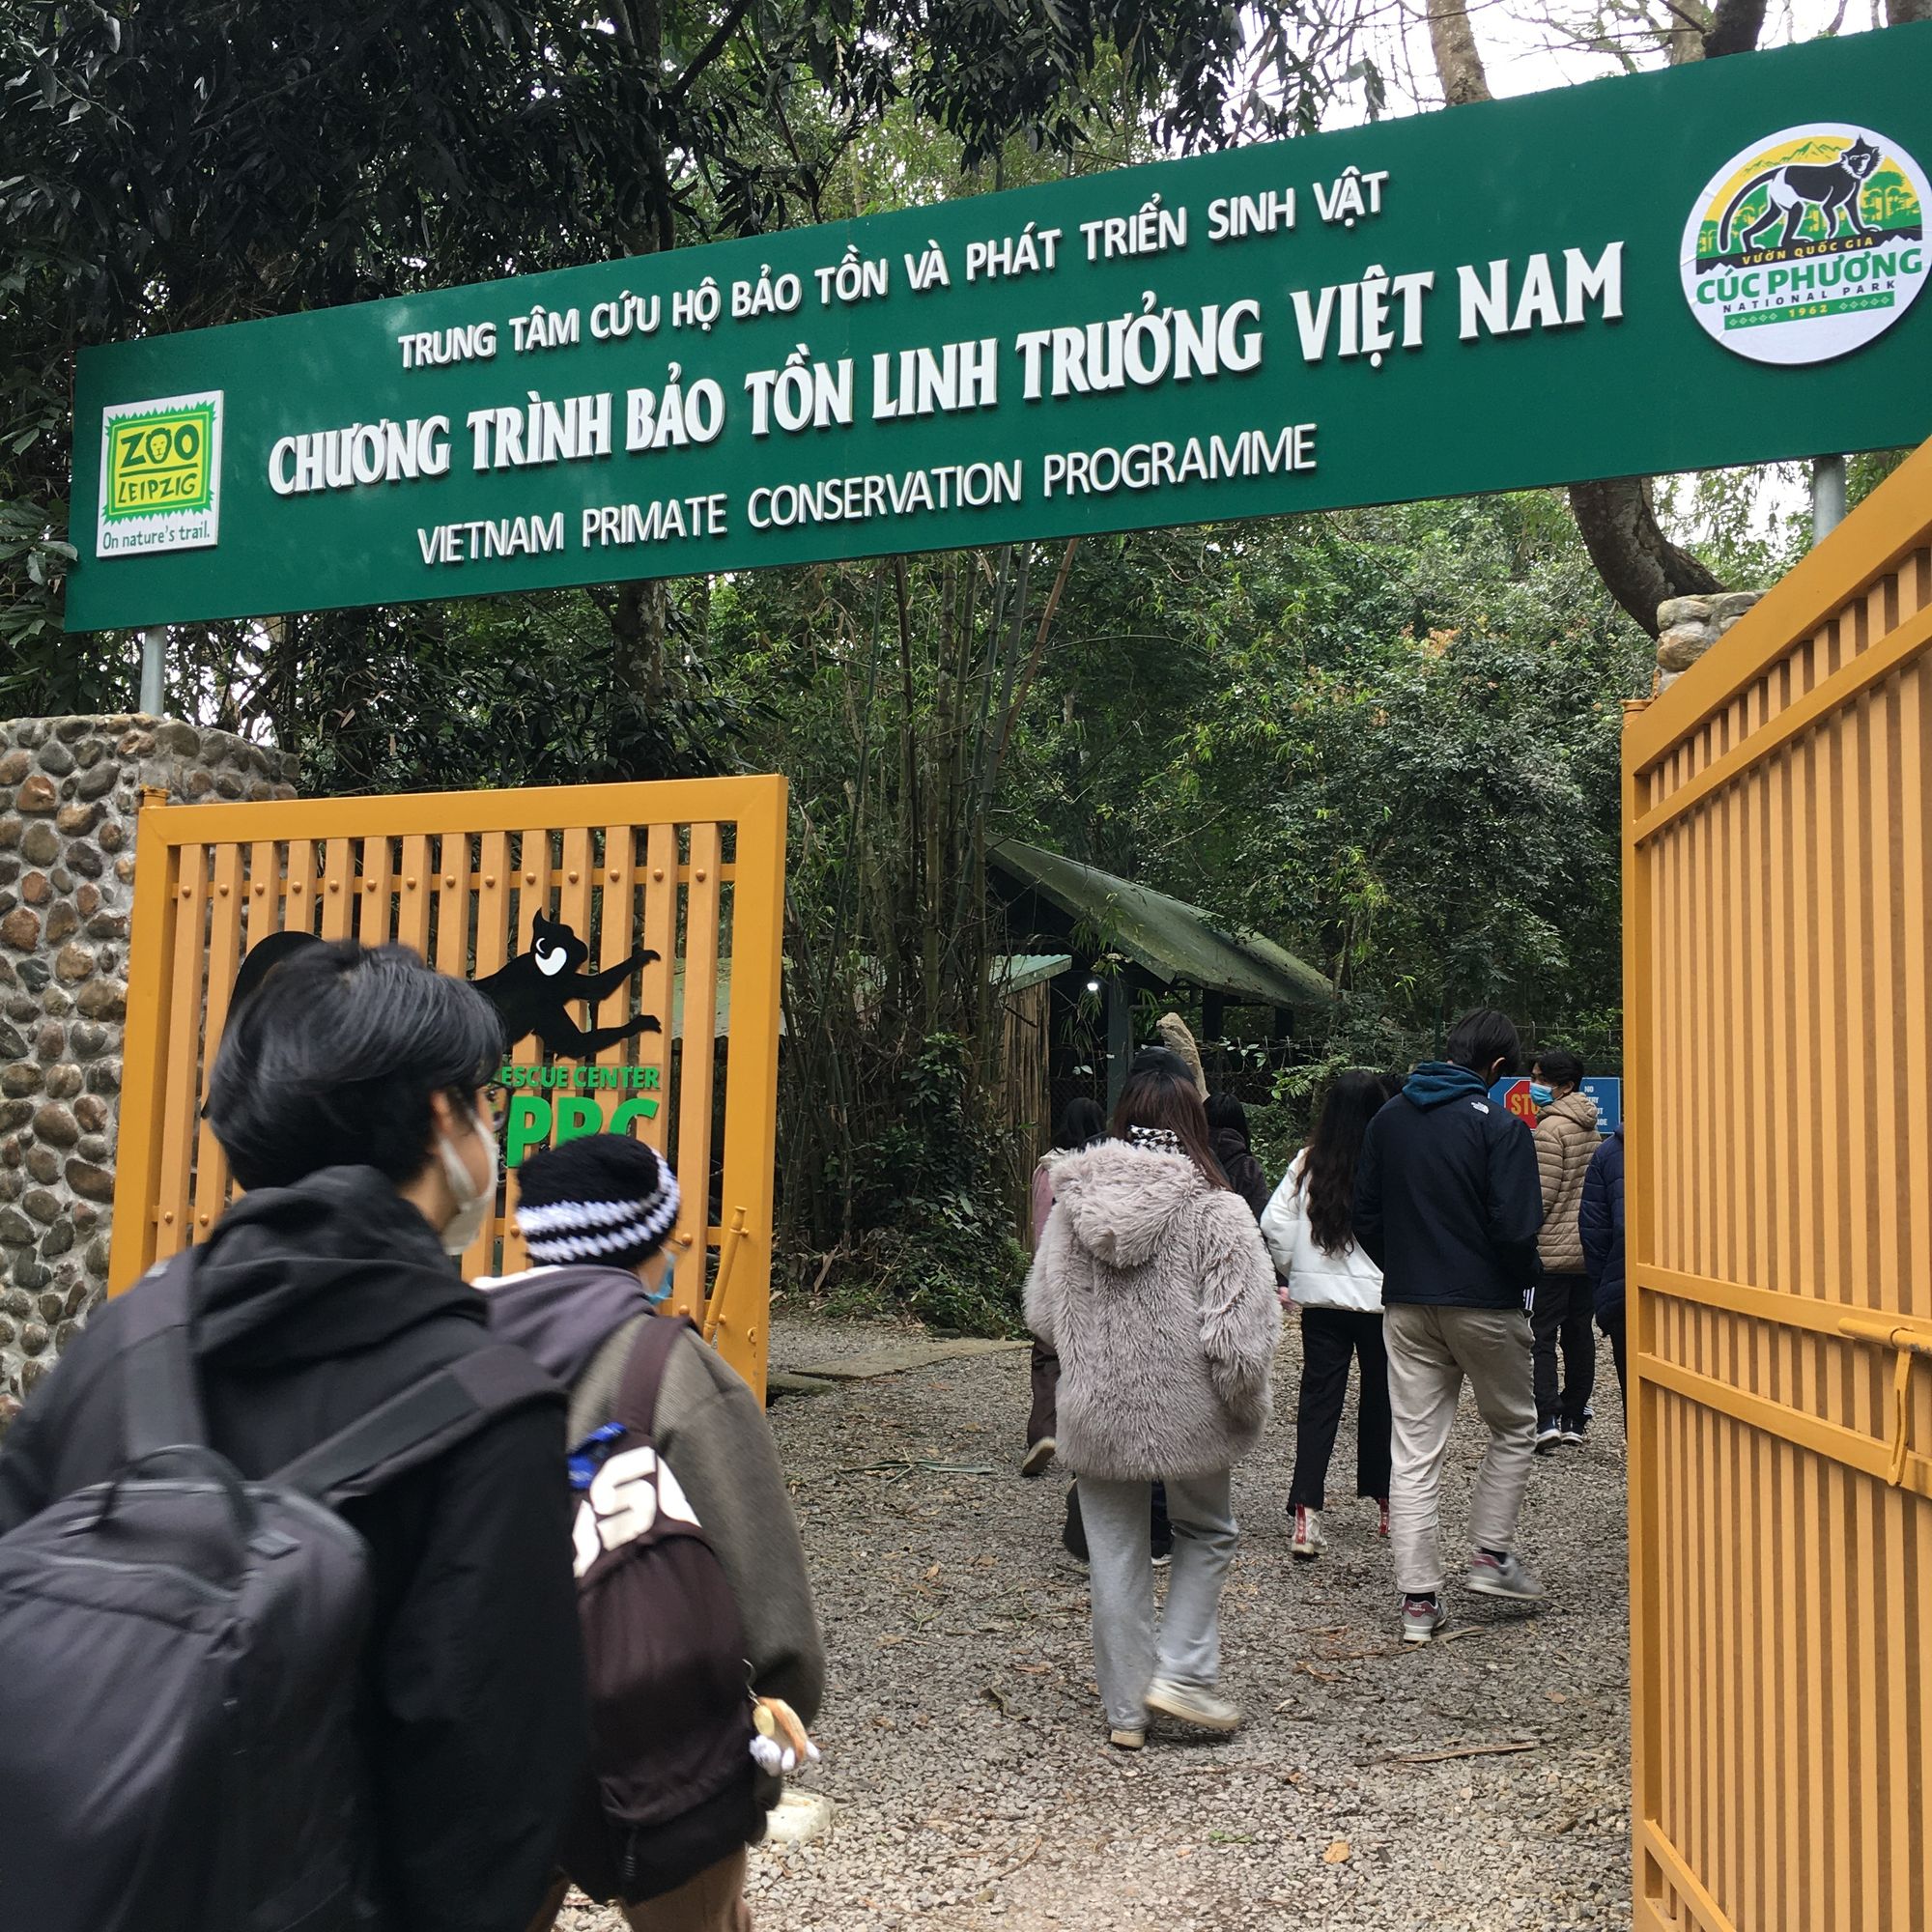 Wildlife: Why, life? - A Memorable Trip to Cuc Phuong National Park